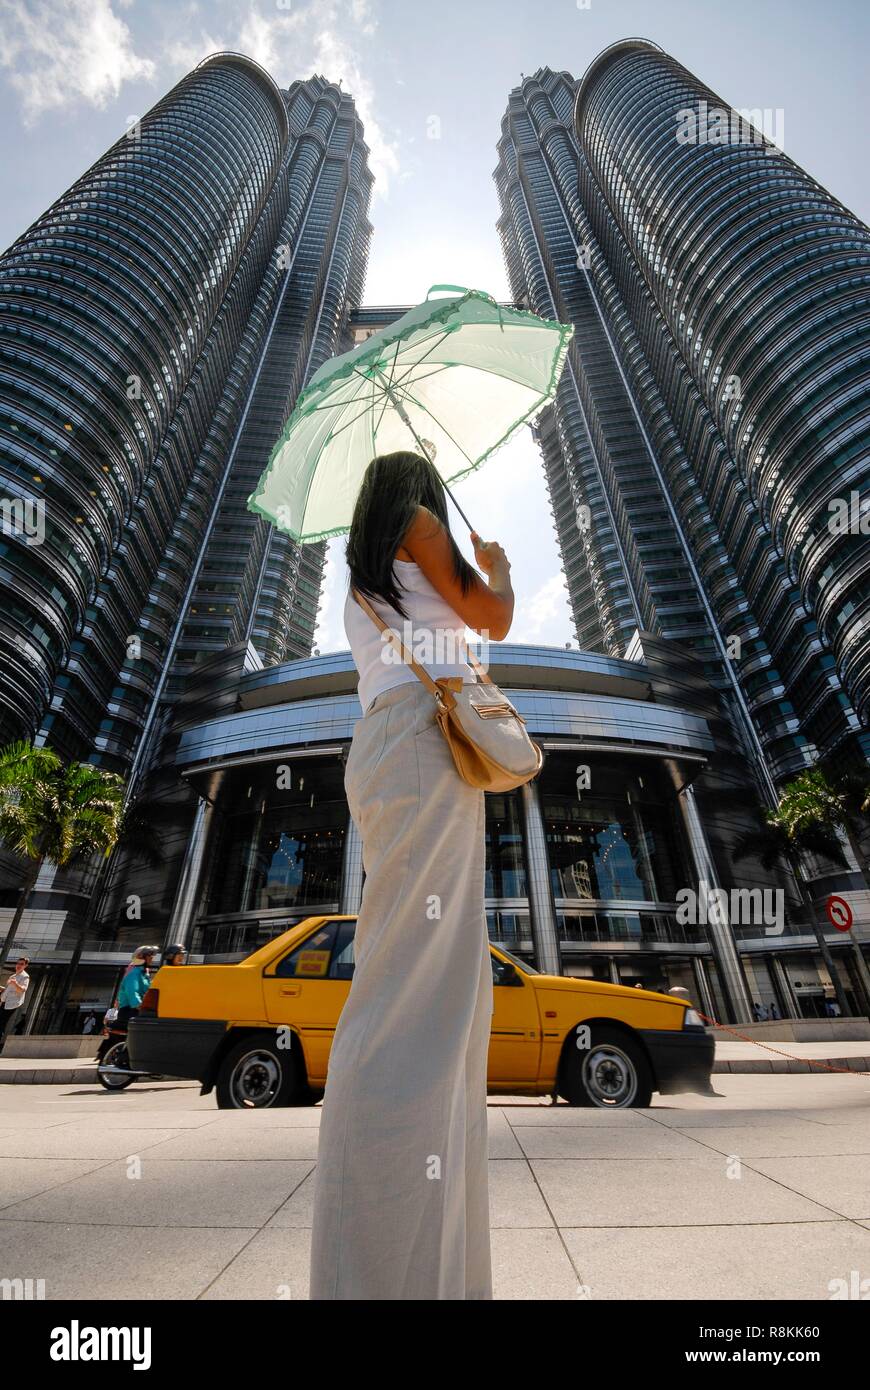 Malaysia, Kuala Lumpur, downtown, the Petronas Twin Towers by architect Cesar Pelli, 452m high with 88 floors opened in 1998, a woman standing in front of the building Stock Photo